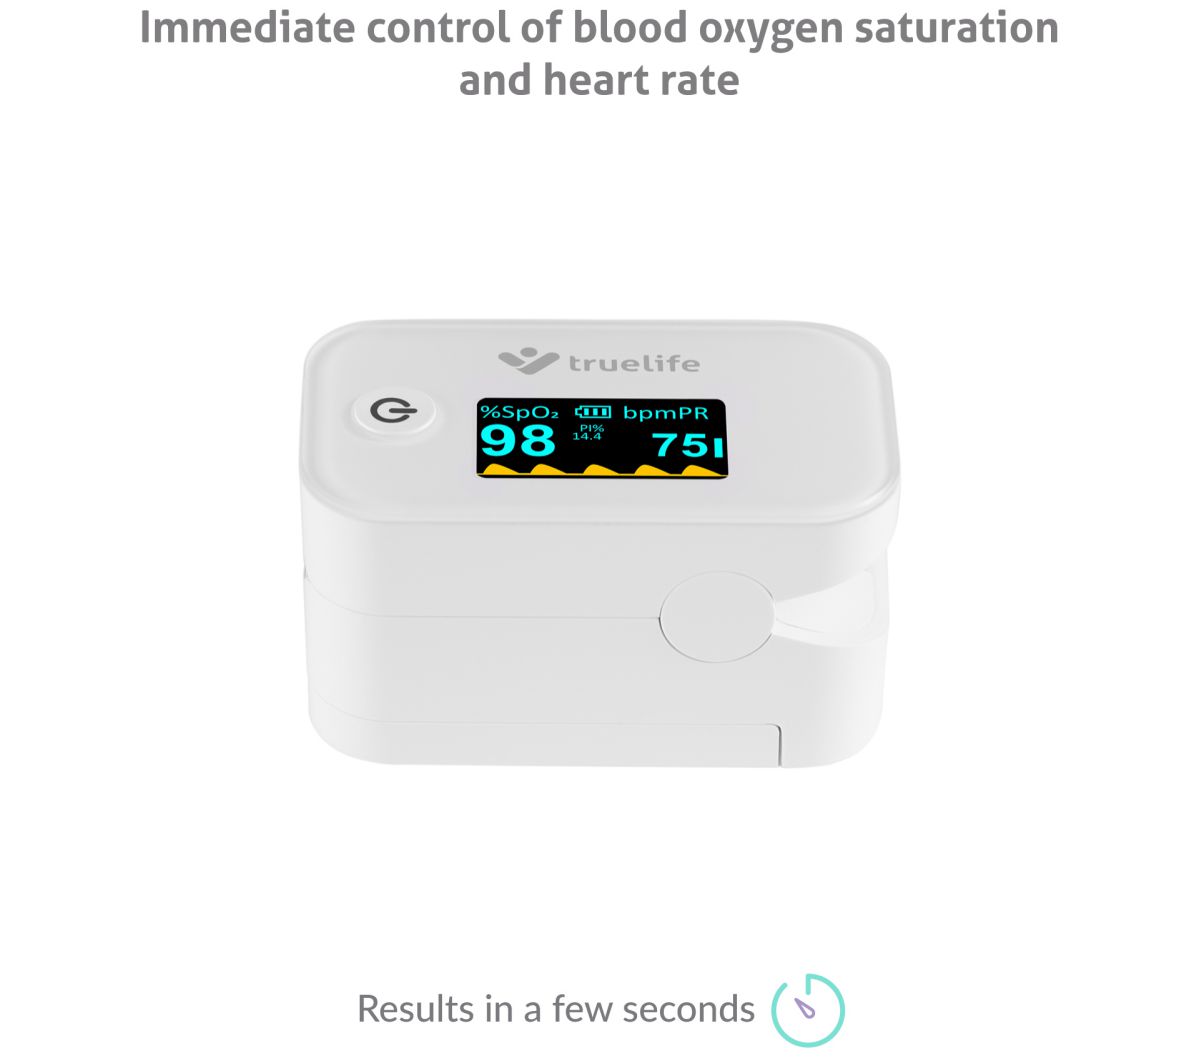 Instantly check blood oxygen saturation